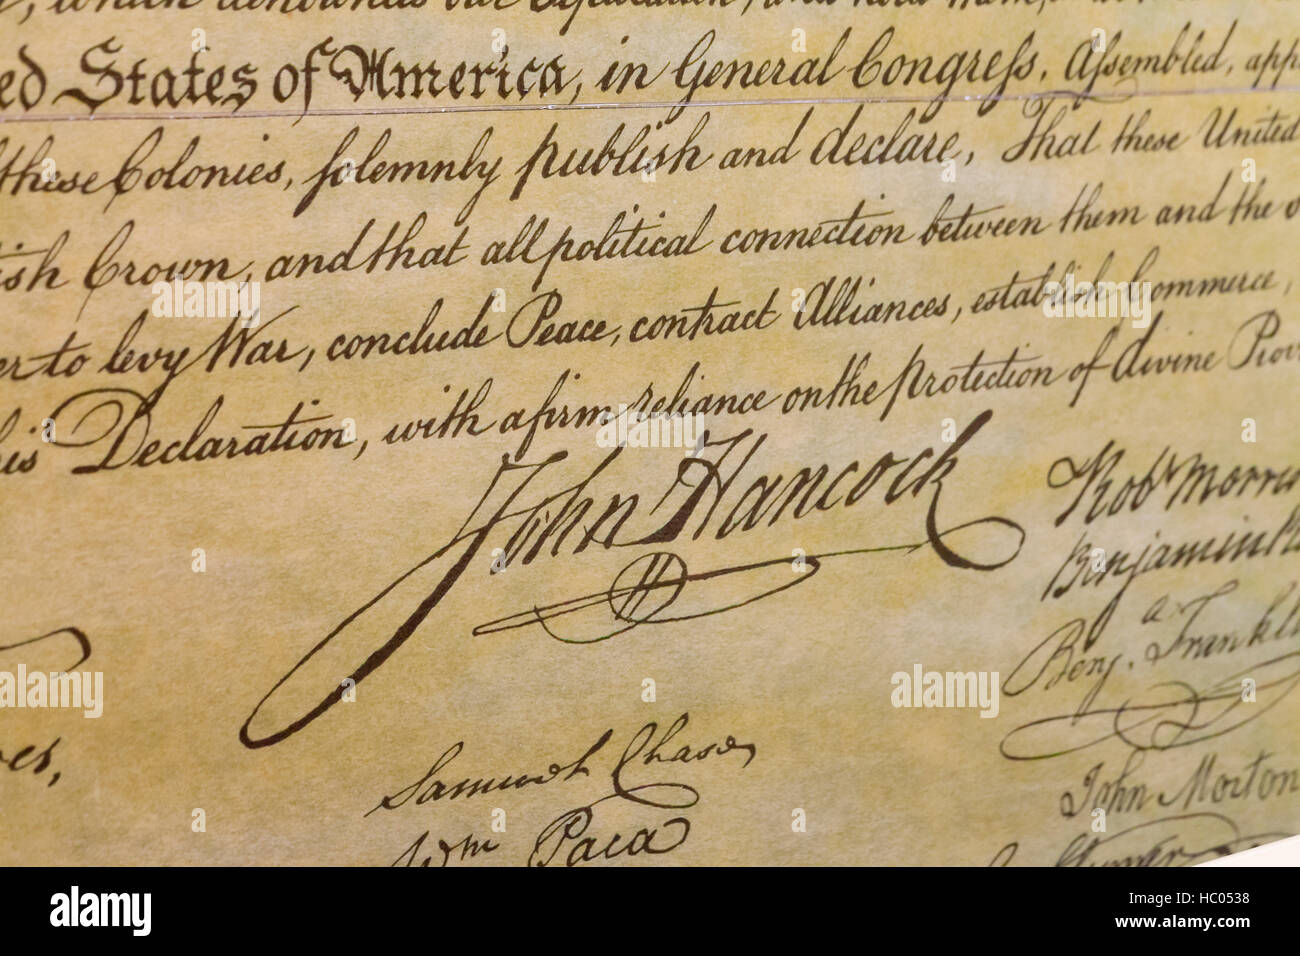 John Hancock signature as shown on the engrossed copy of the US Declaration of Independence Stock Photo